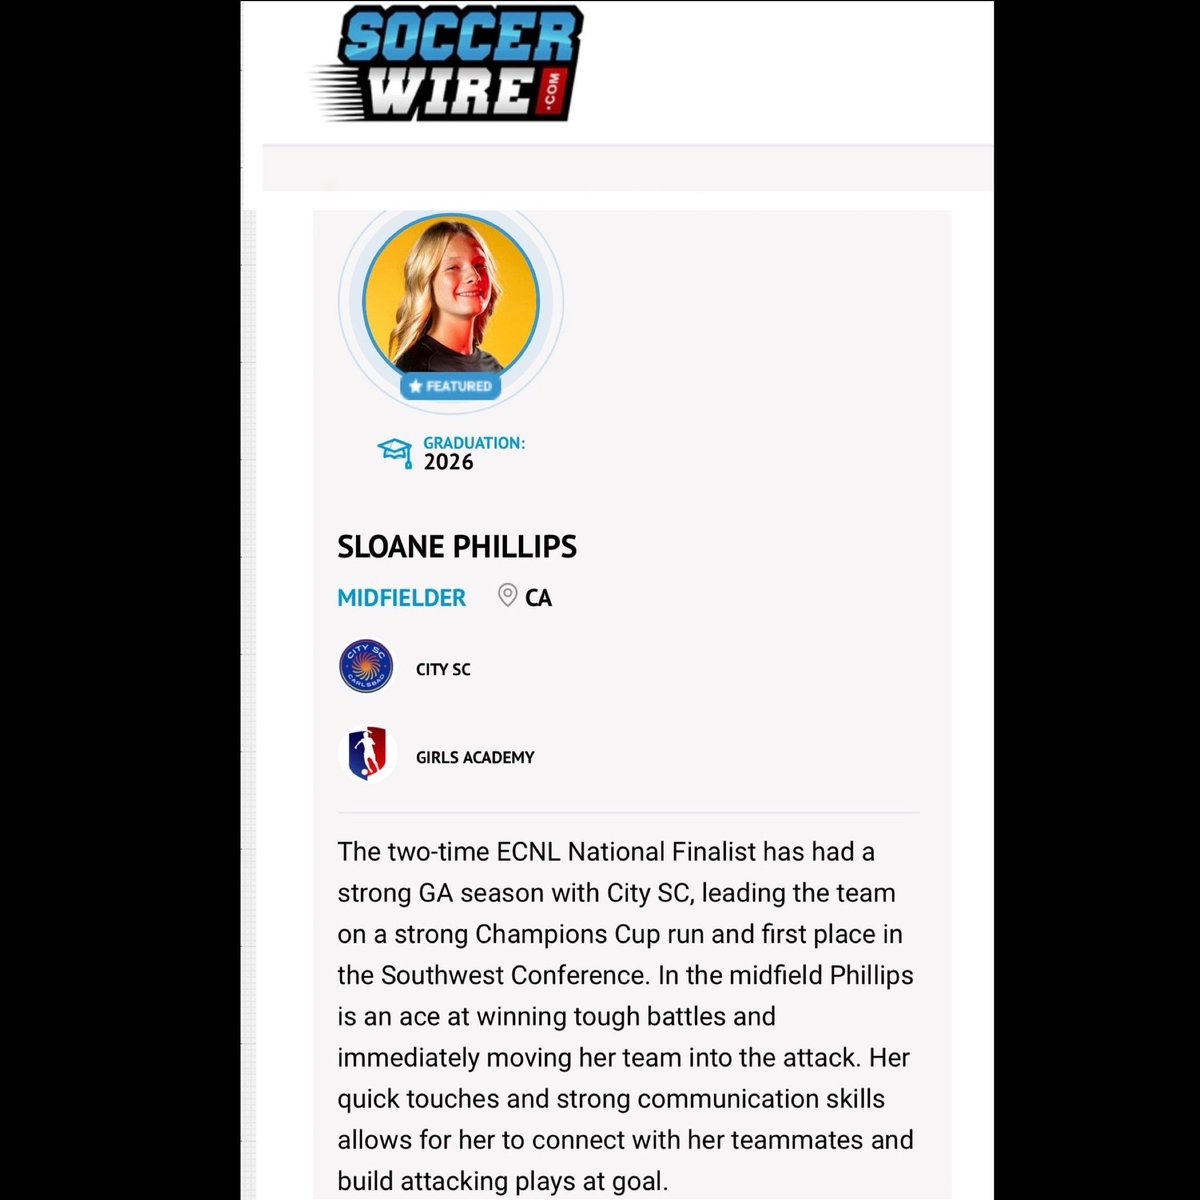 Thank you so much @TheSoccerWire for the shoutout!